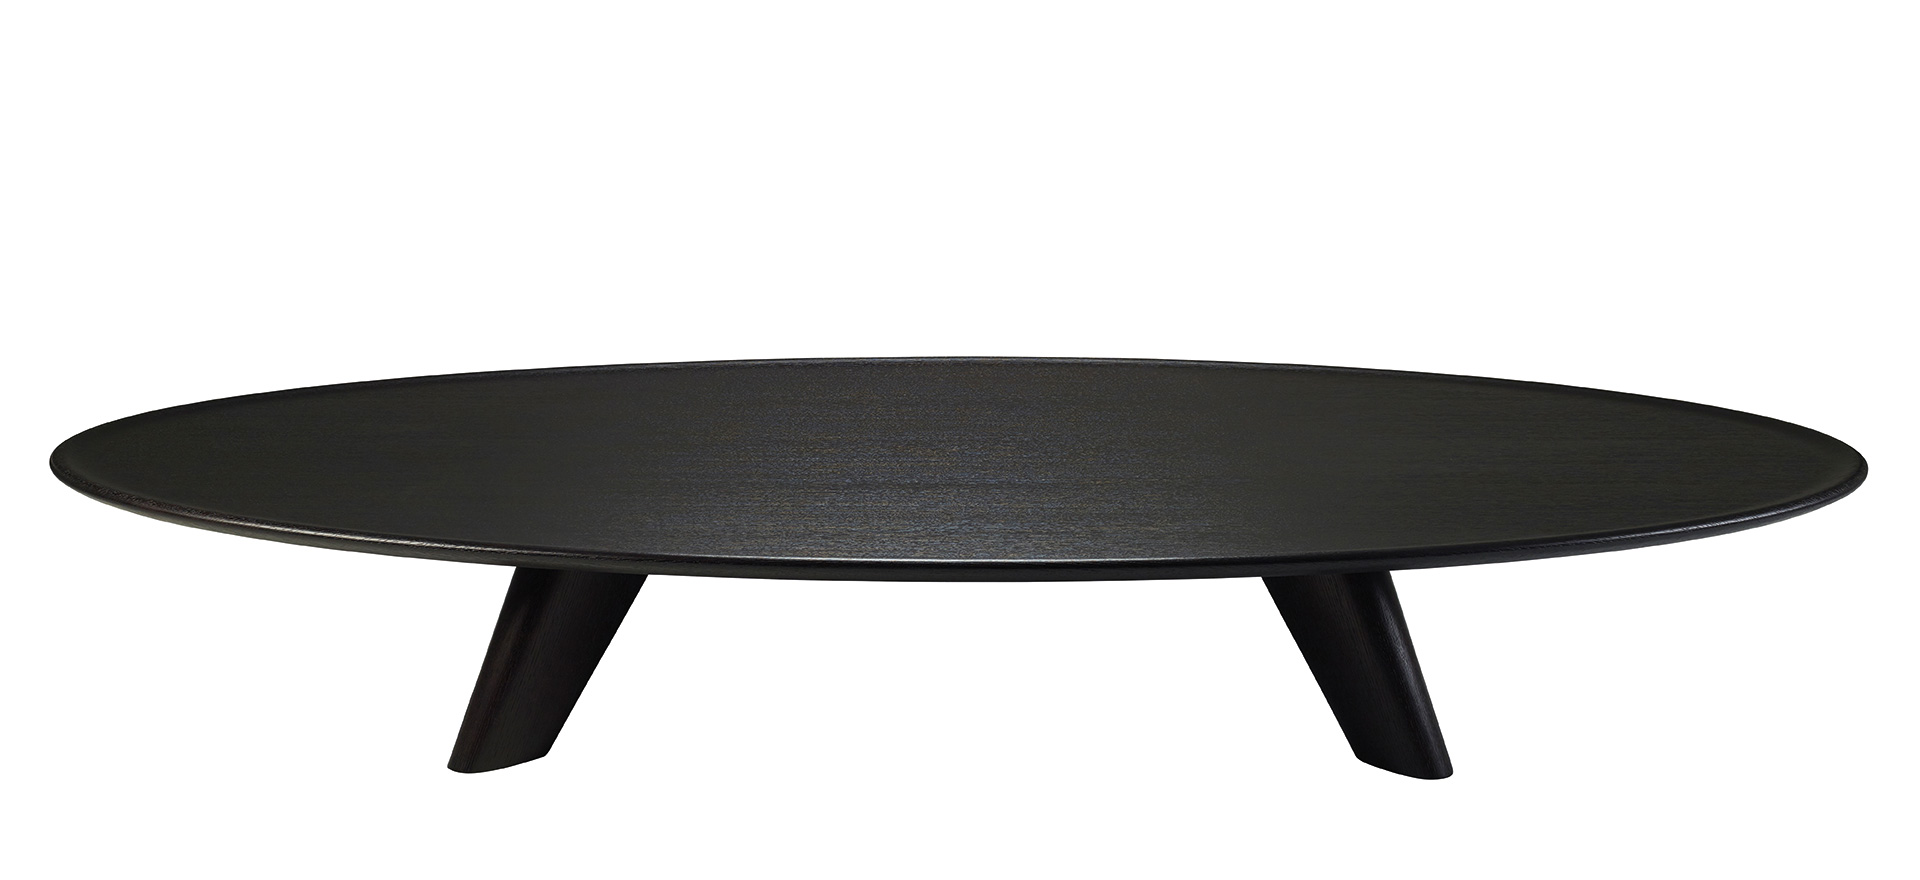 Djennè is an essential wooden coffee table with rounded and grooved profiles, from Promemoria's Indigo Tales collection | Promemoria